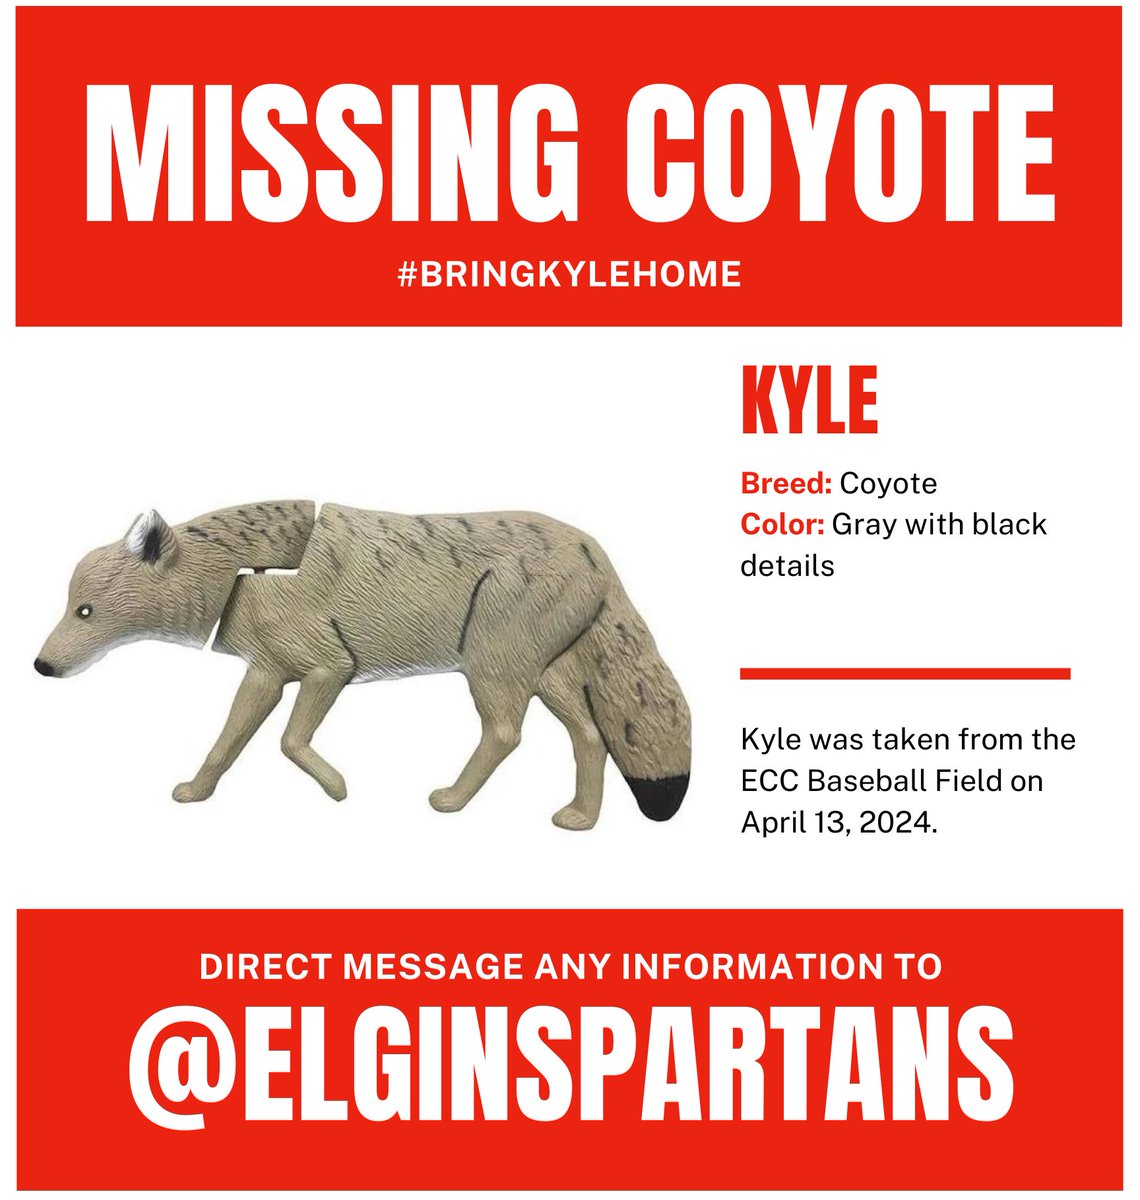 Our beloved coyote decoy, Kyle, was stolen over the weekend. He has protected the baseball field from geese for years. Our hearts are broken as he truly is a member of the @ElgCCBaseball1 family. If you know anything about his whereabouts, please DM us. #BringKyleHome 💙